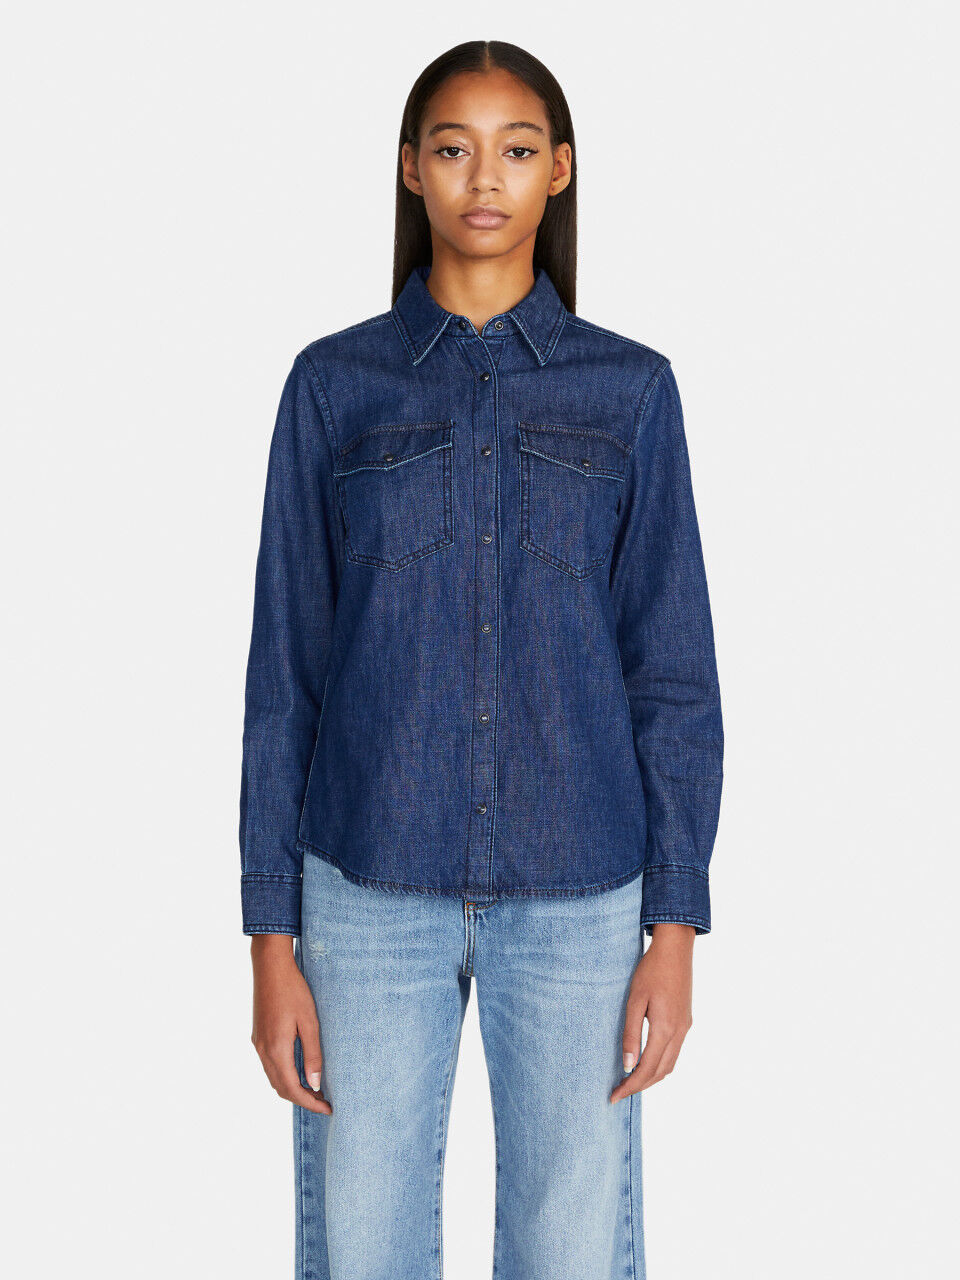 Women's Shirts and Blouses 2023 Collection | Sisley World